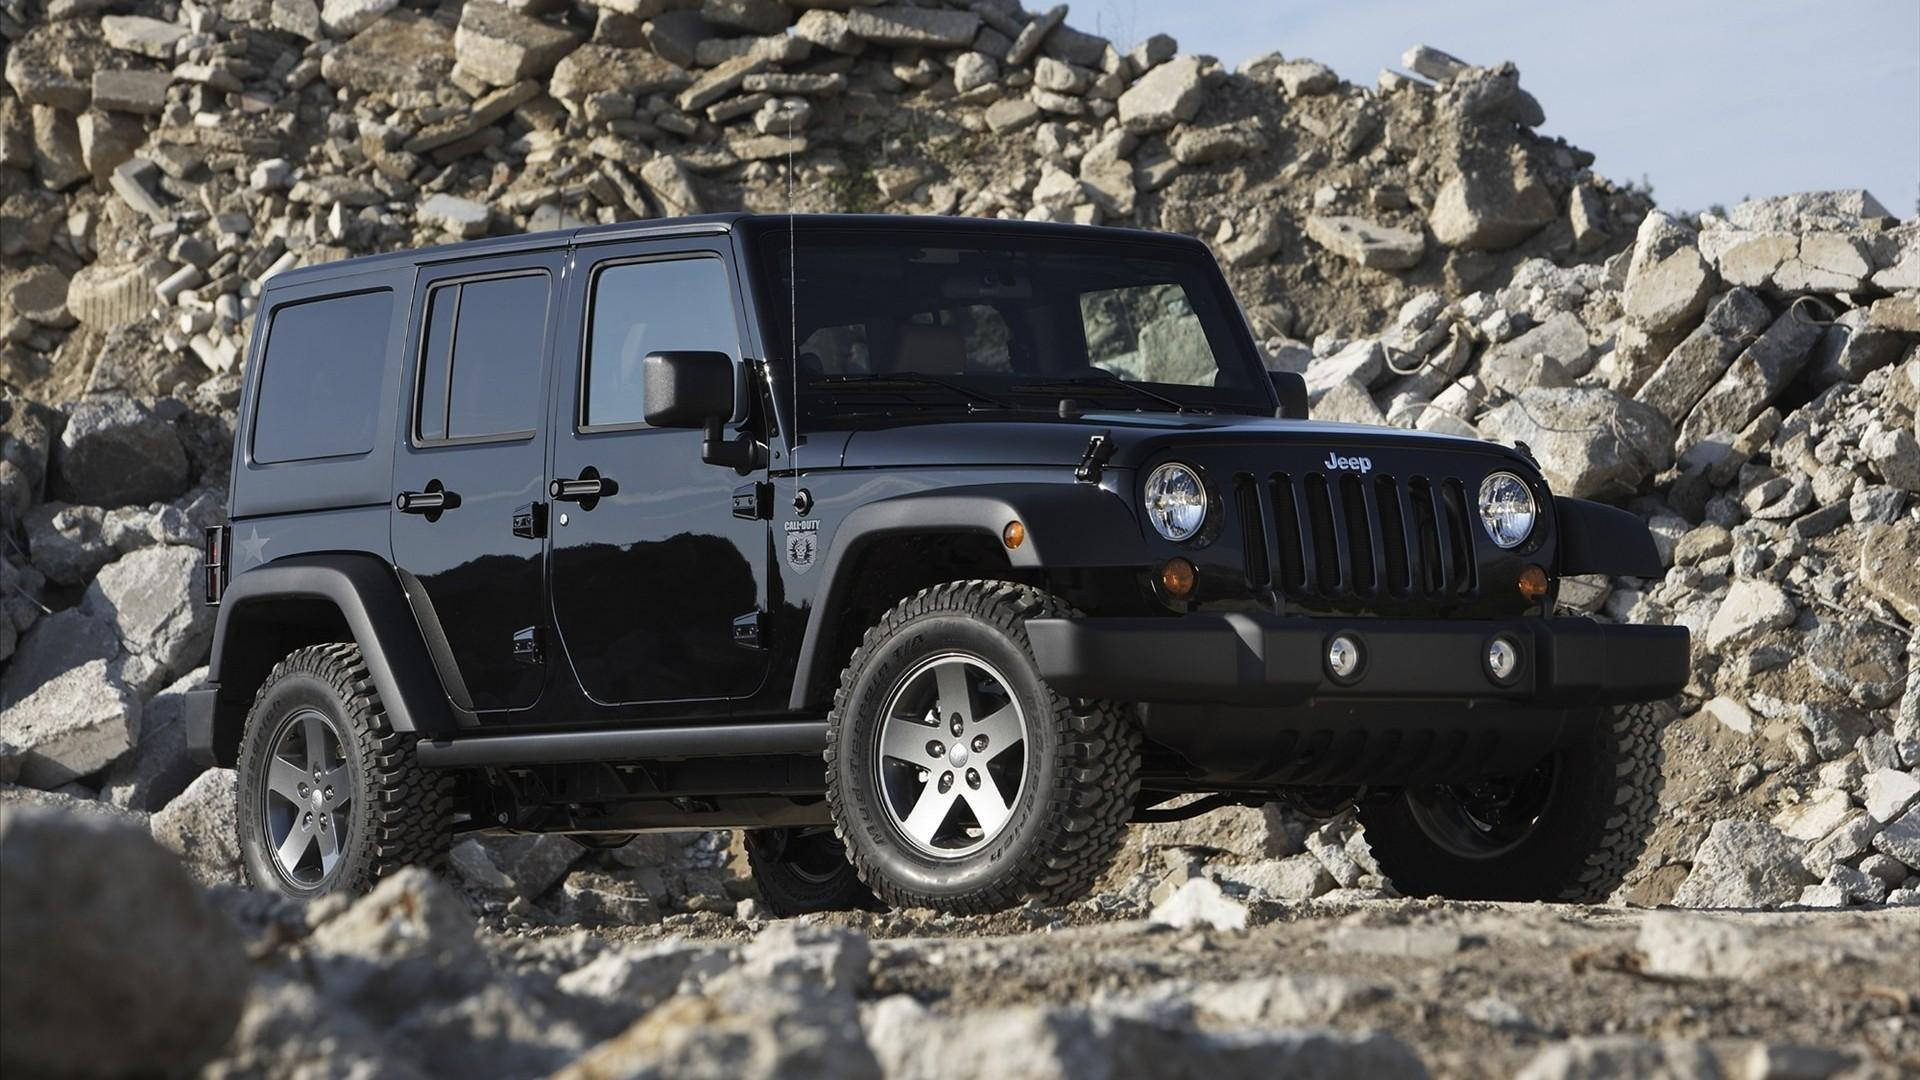 - "Black Jeep Wrangler Dominating the Rough and Rocky Terrain" Wallpaper